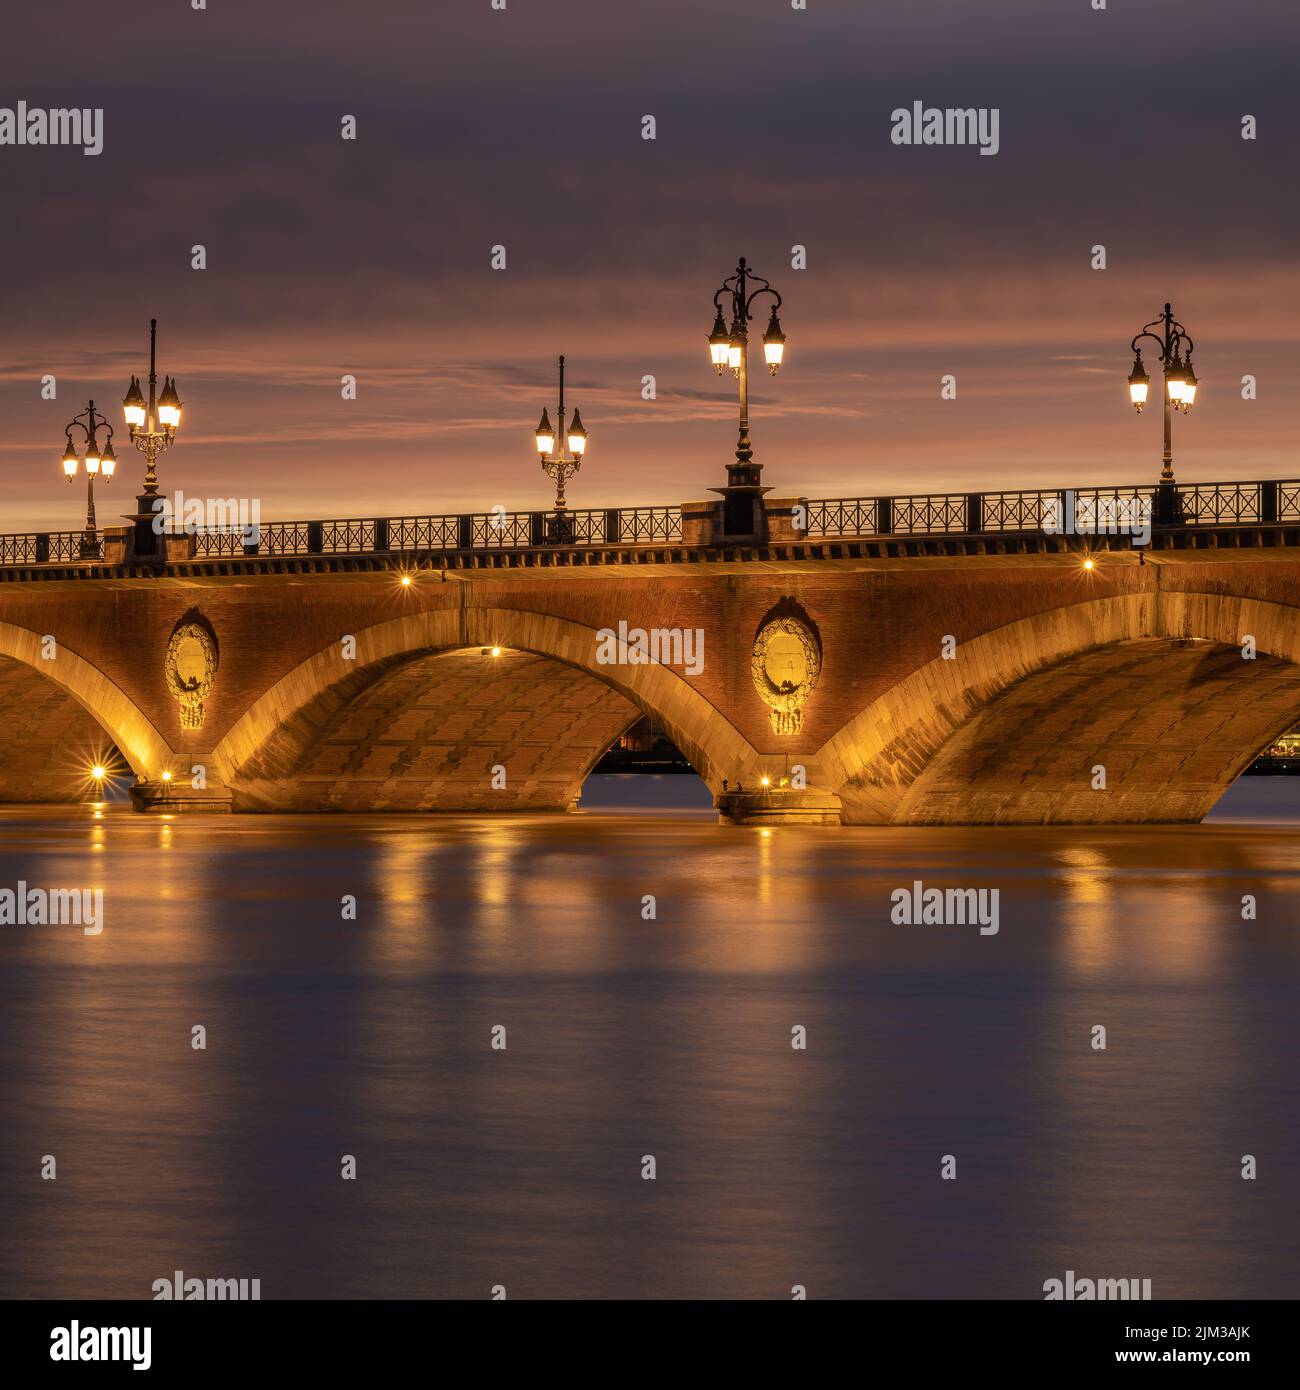 Long exposure of the Pont de Pierre spanning the River Garonne in the city of Bordeaux, France illuminated just after sunset Stock Photo